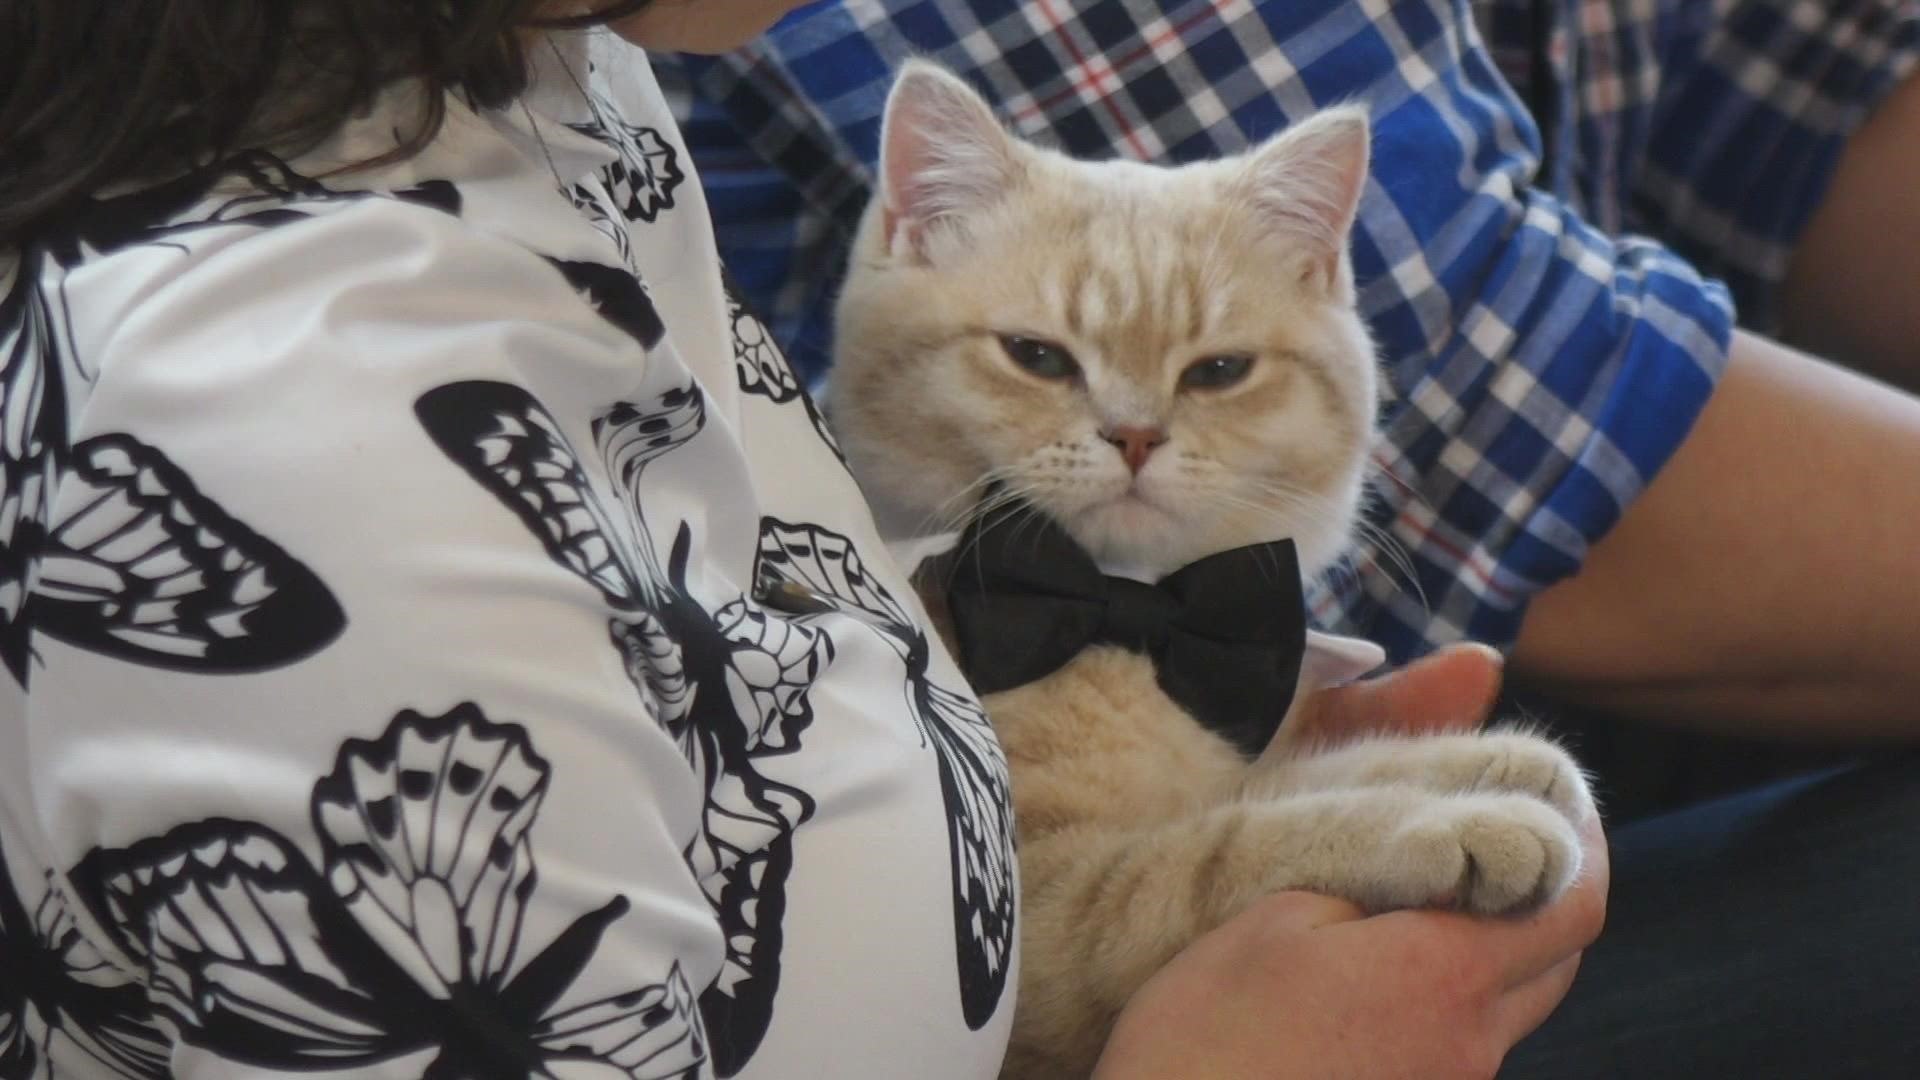 A British Shorthair from Bellevue wants your vote for America's Favorite Pet. Votes for the cat also benefit the Lynnwood-based animal non-profit PAWS.